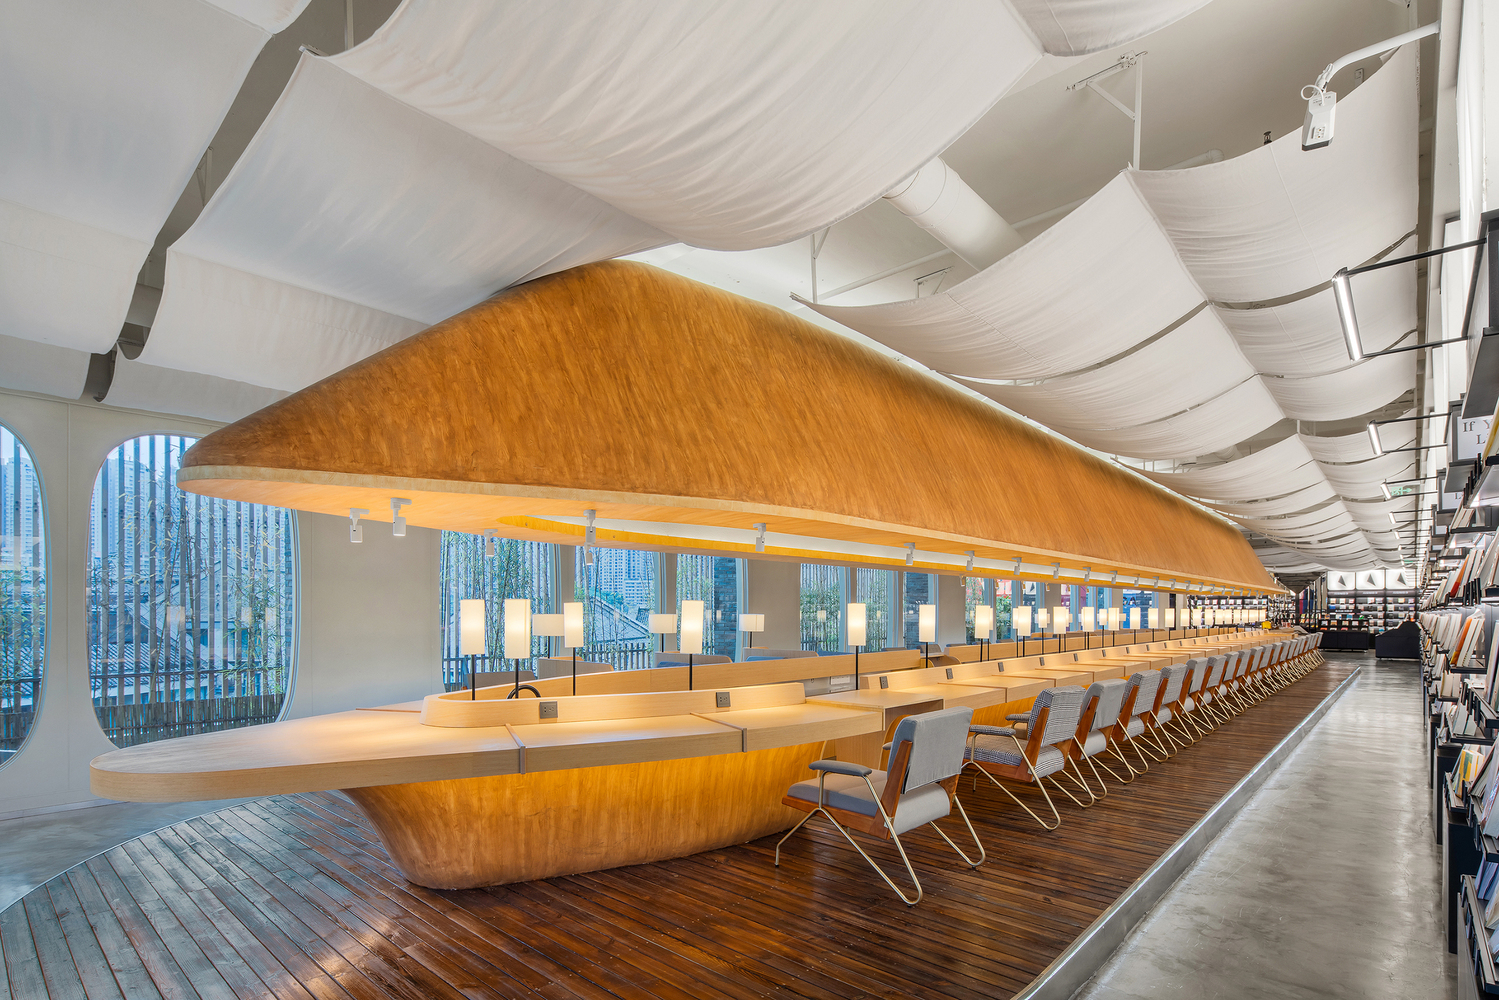 The reading area is designed with an atmosphere that brings the feeling of being reading on an spaceship